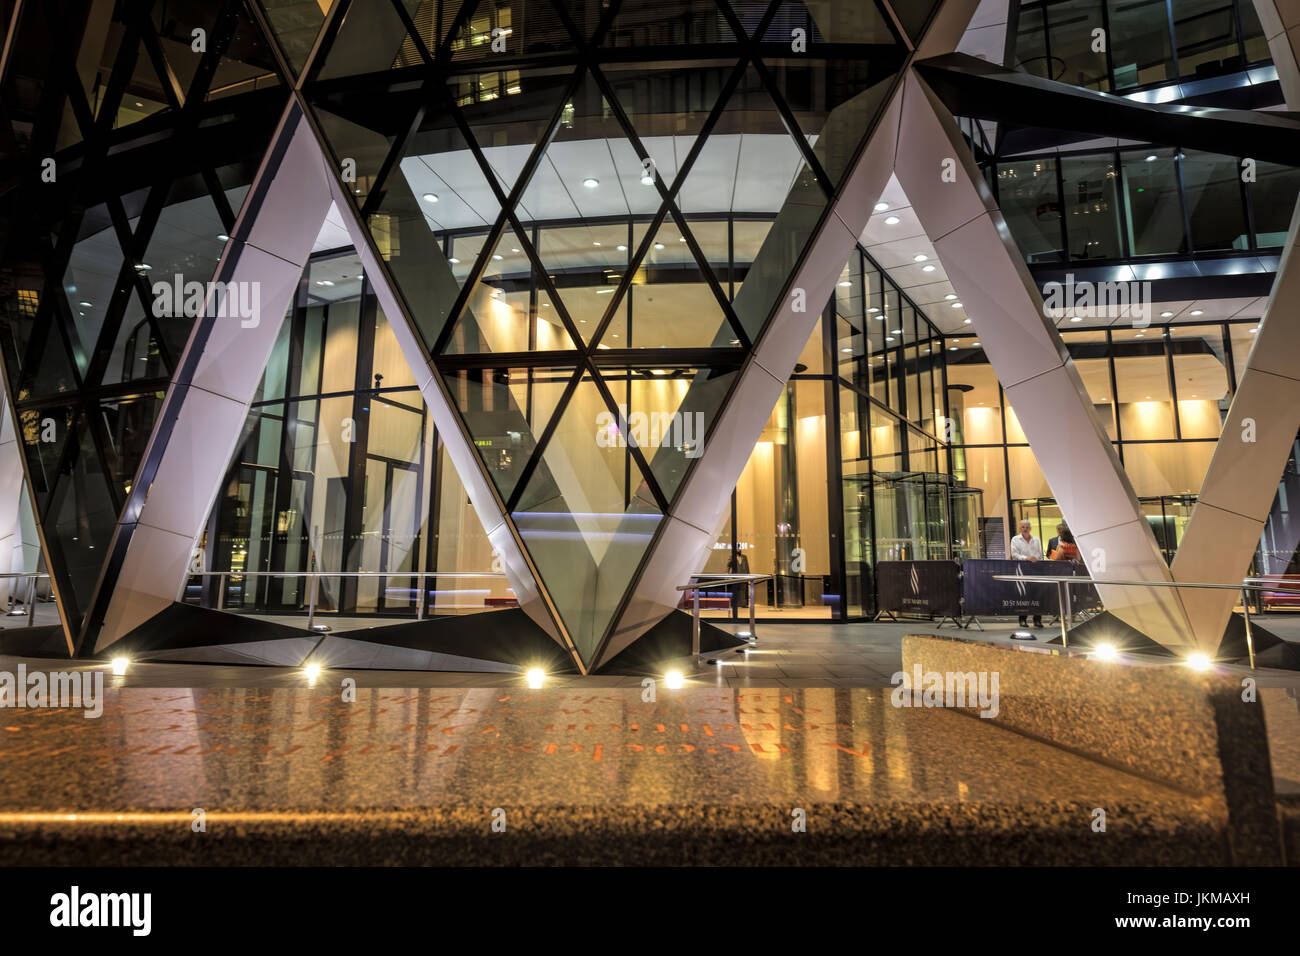 Entrance to Gherkin Building in London Stock Photo